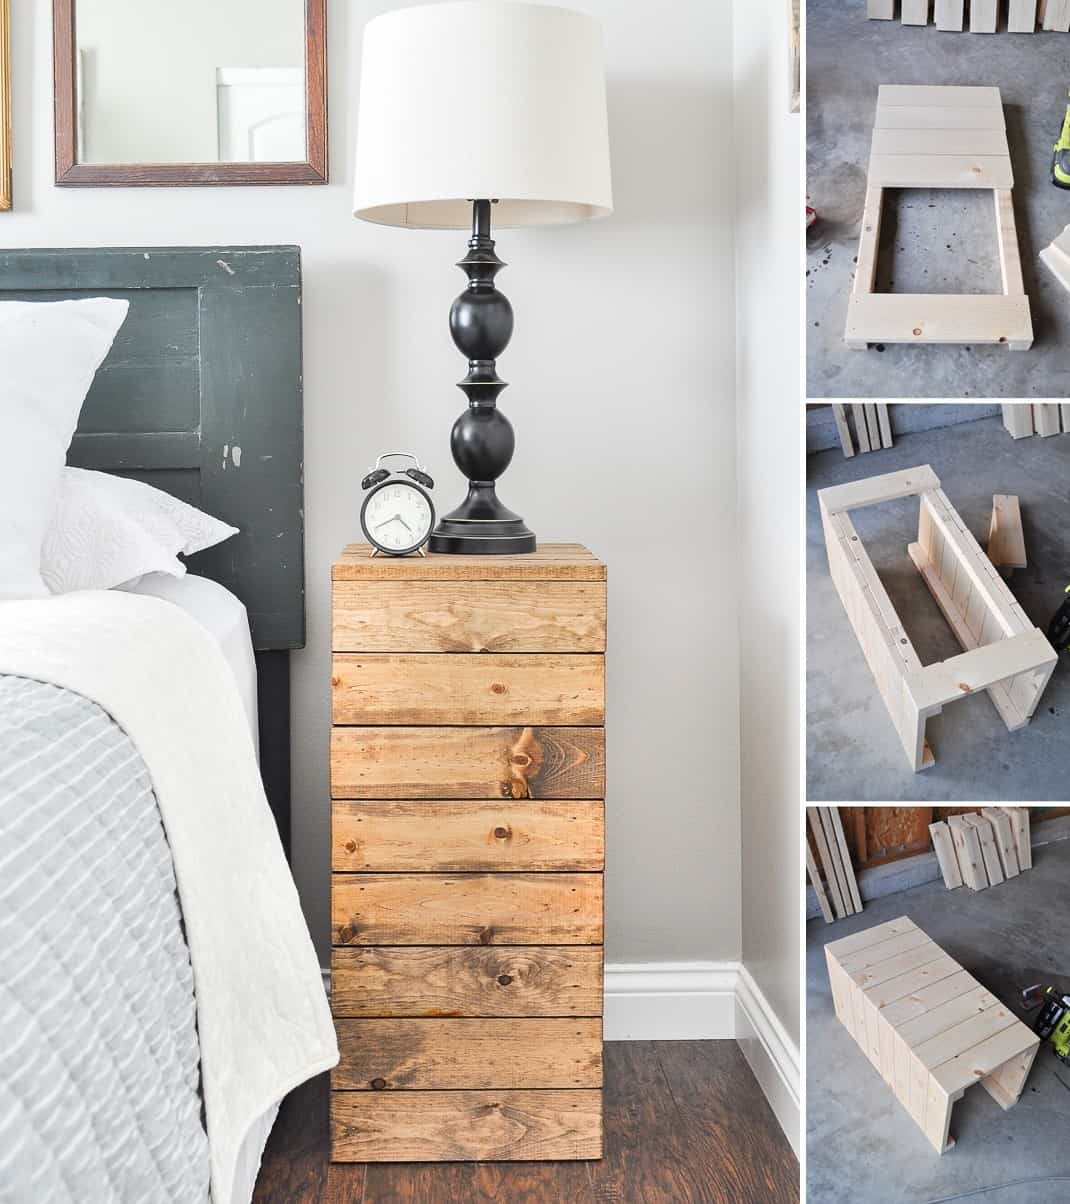 Nightstand Ideas Perfect For A Small Bedroom Remodel Or Move